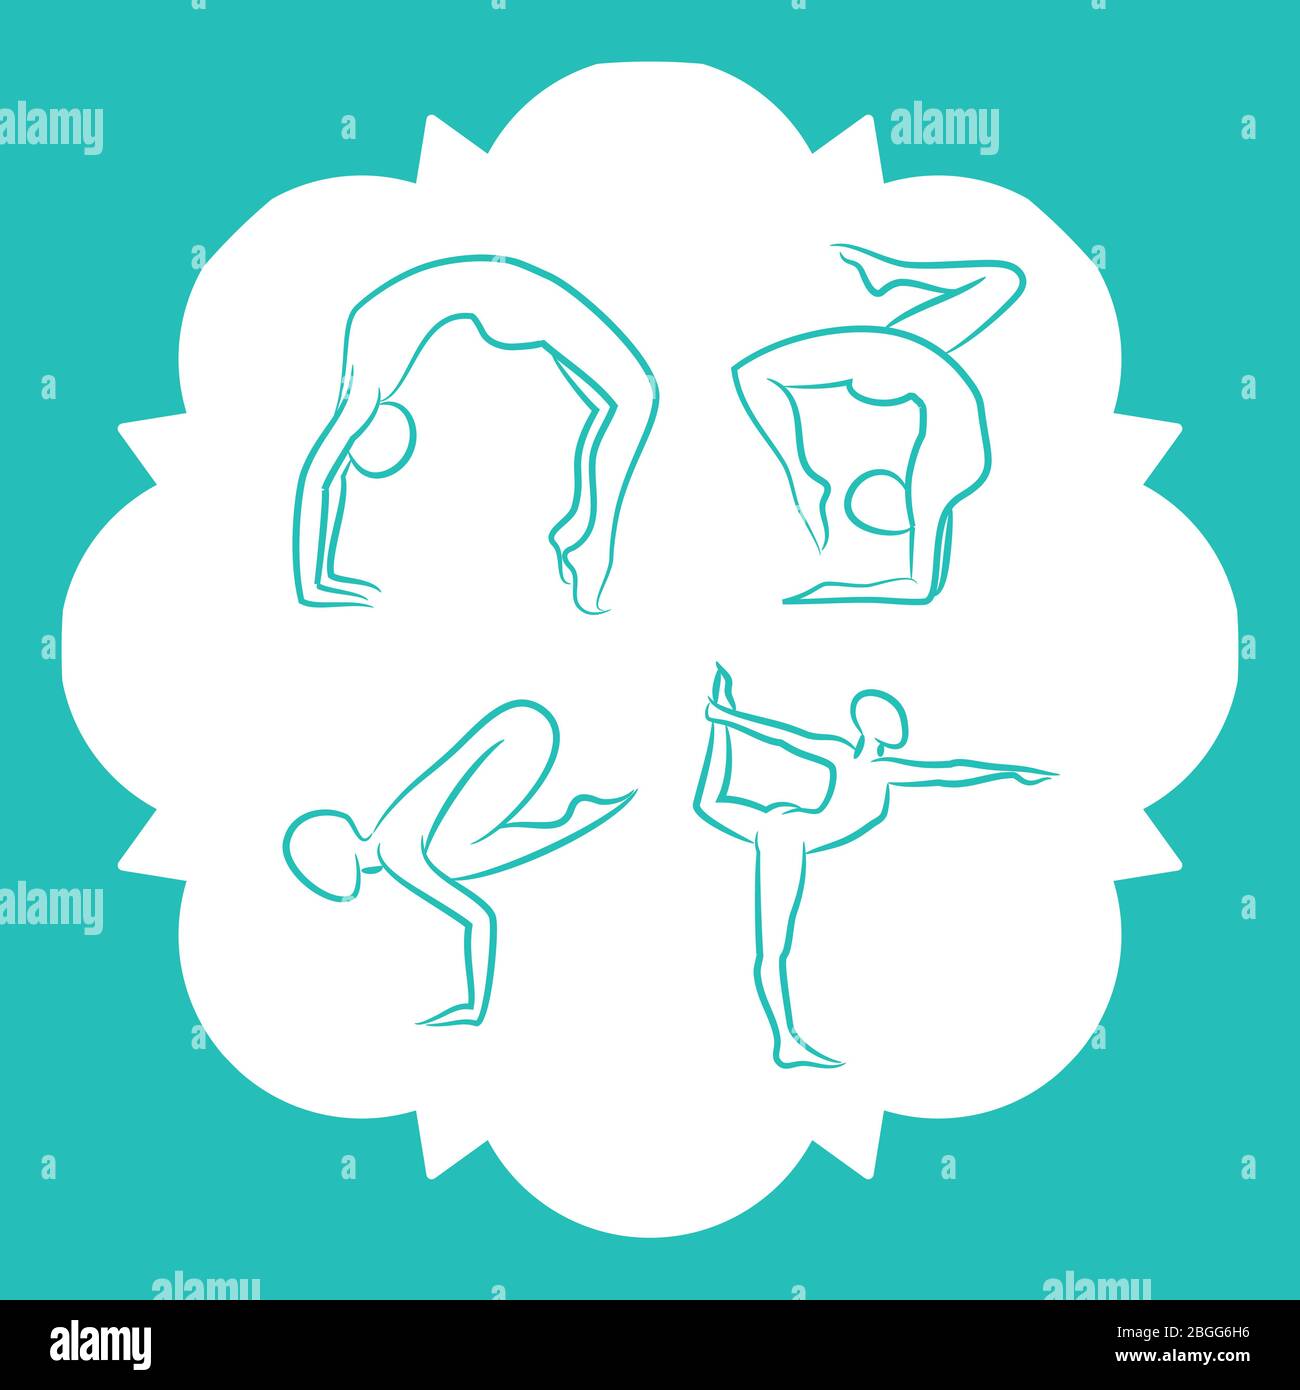 Yoga and pilates poses of set line style vector silhouettes illustration Stock Vector